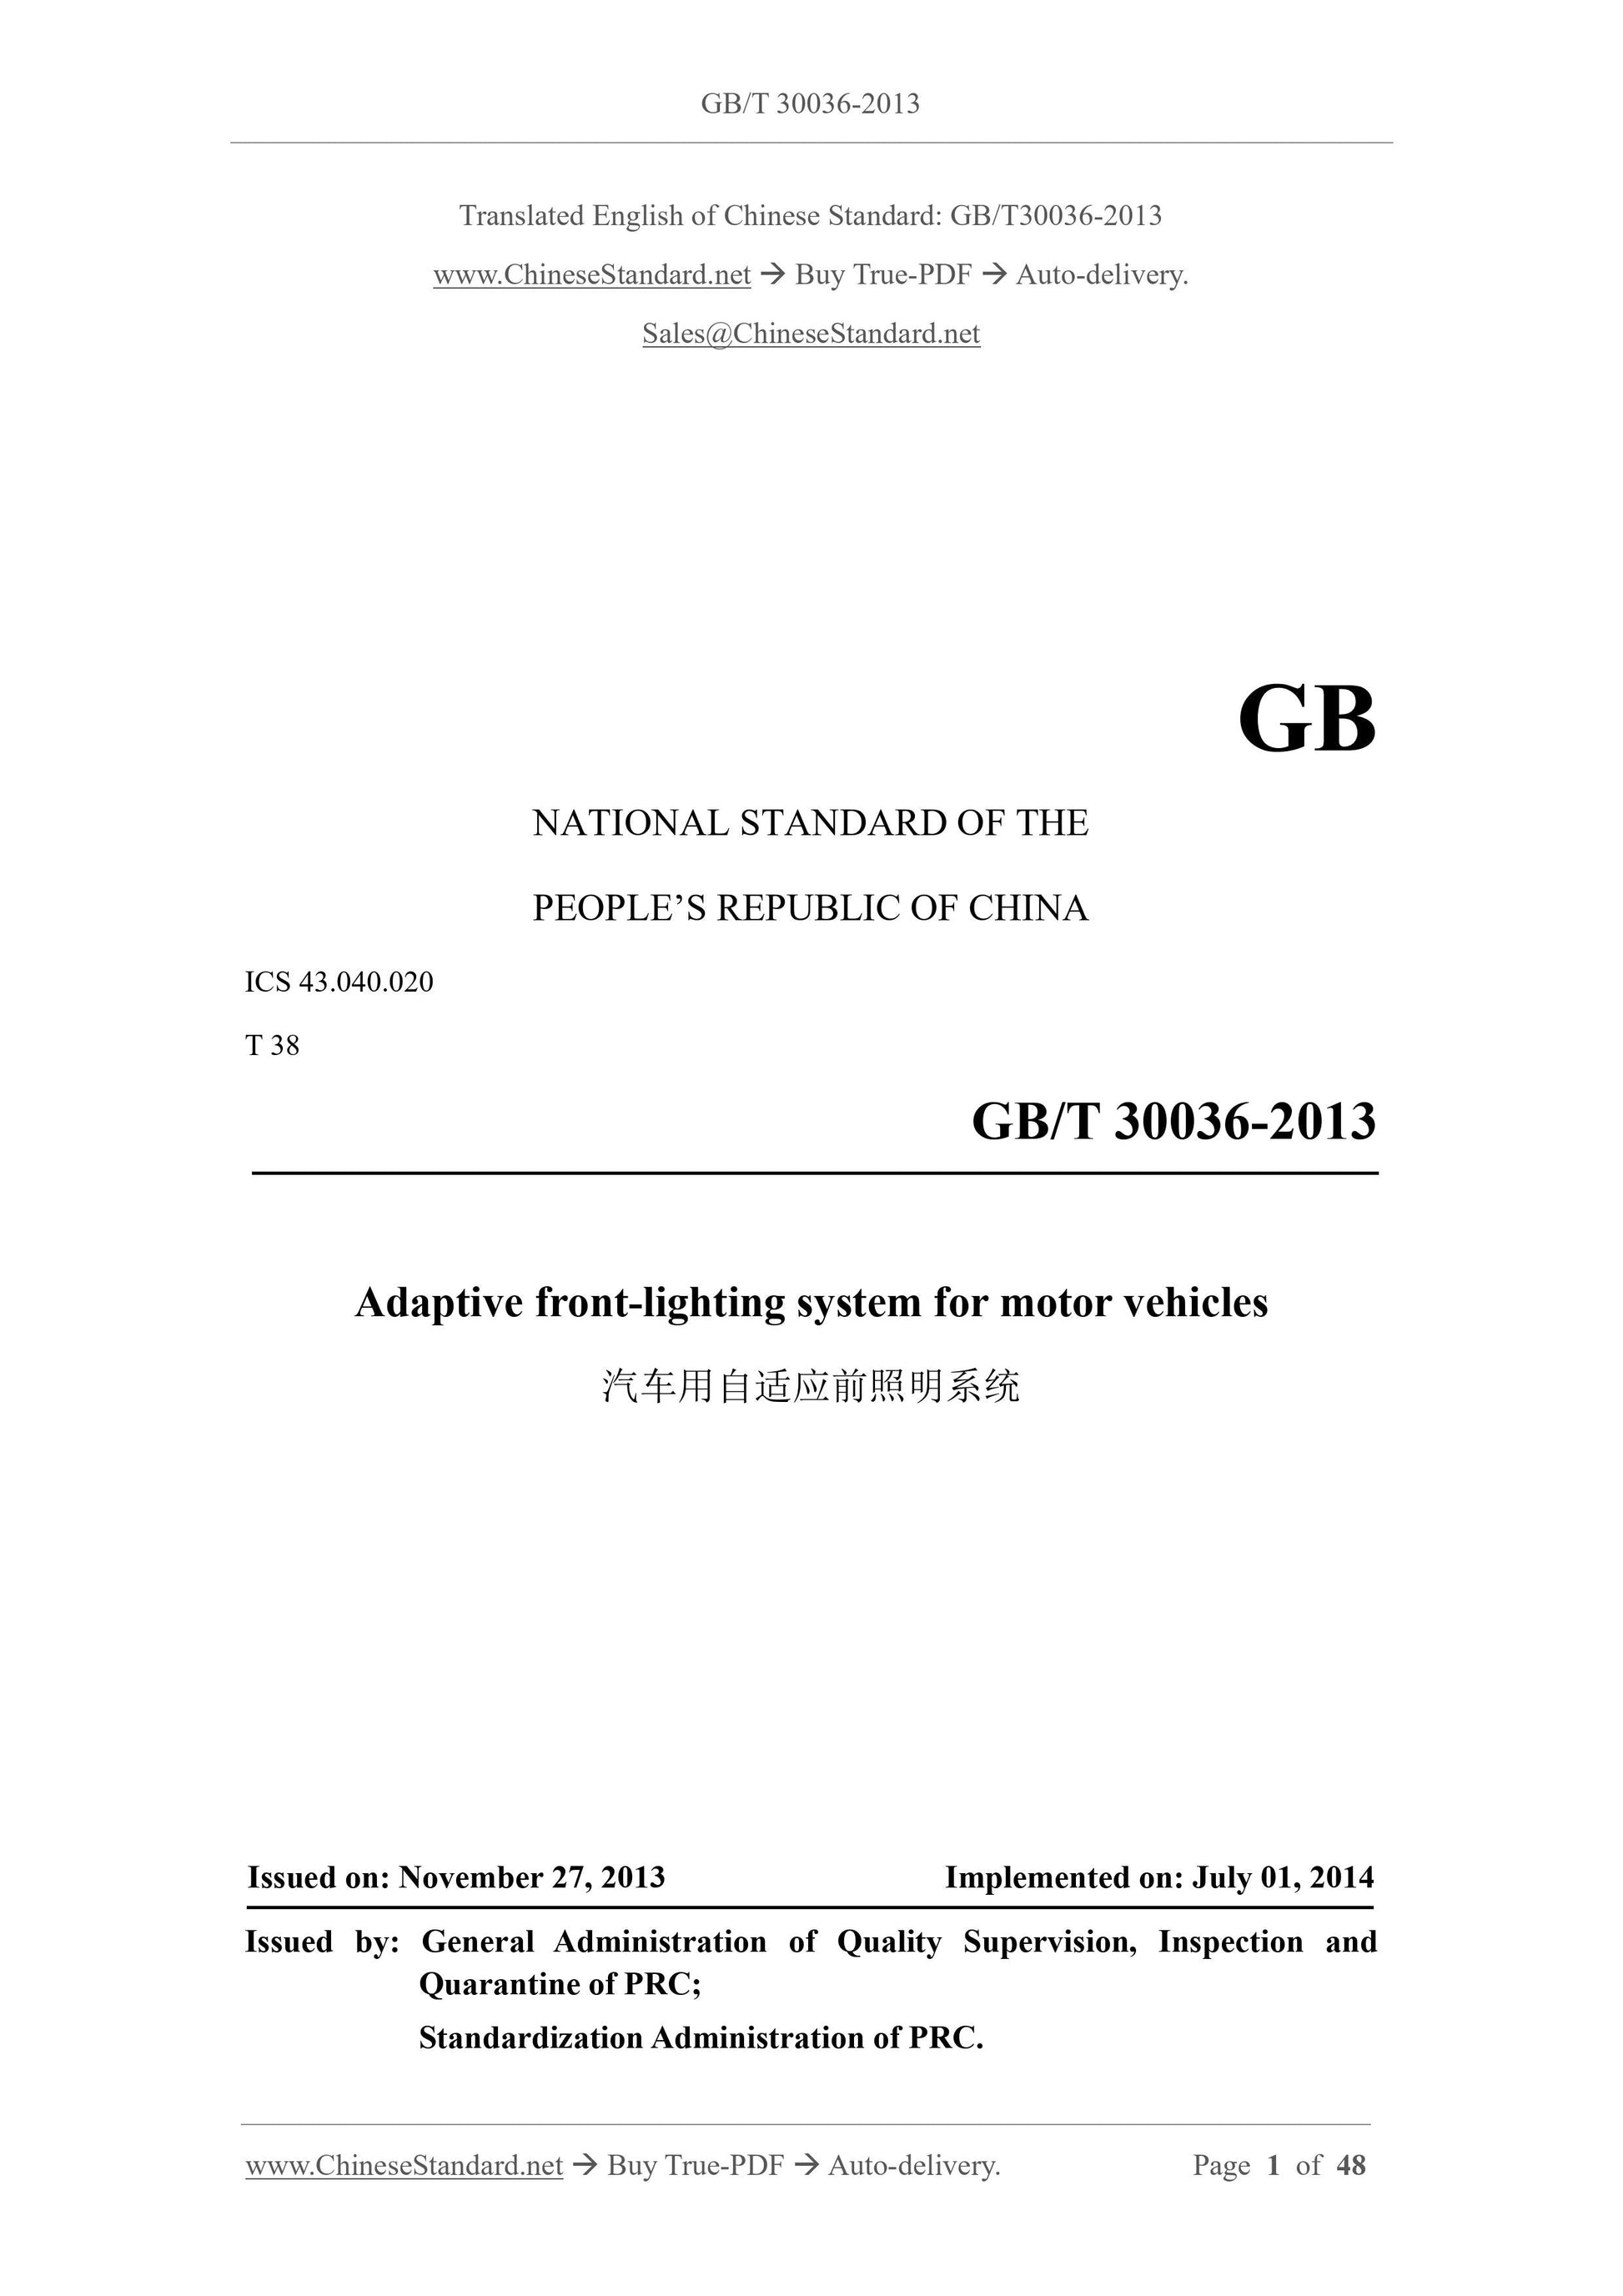 GB/T 30036-2013 Page 1